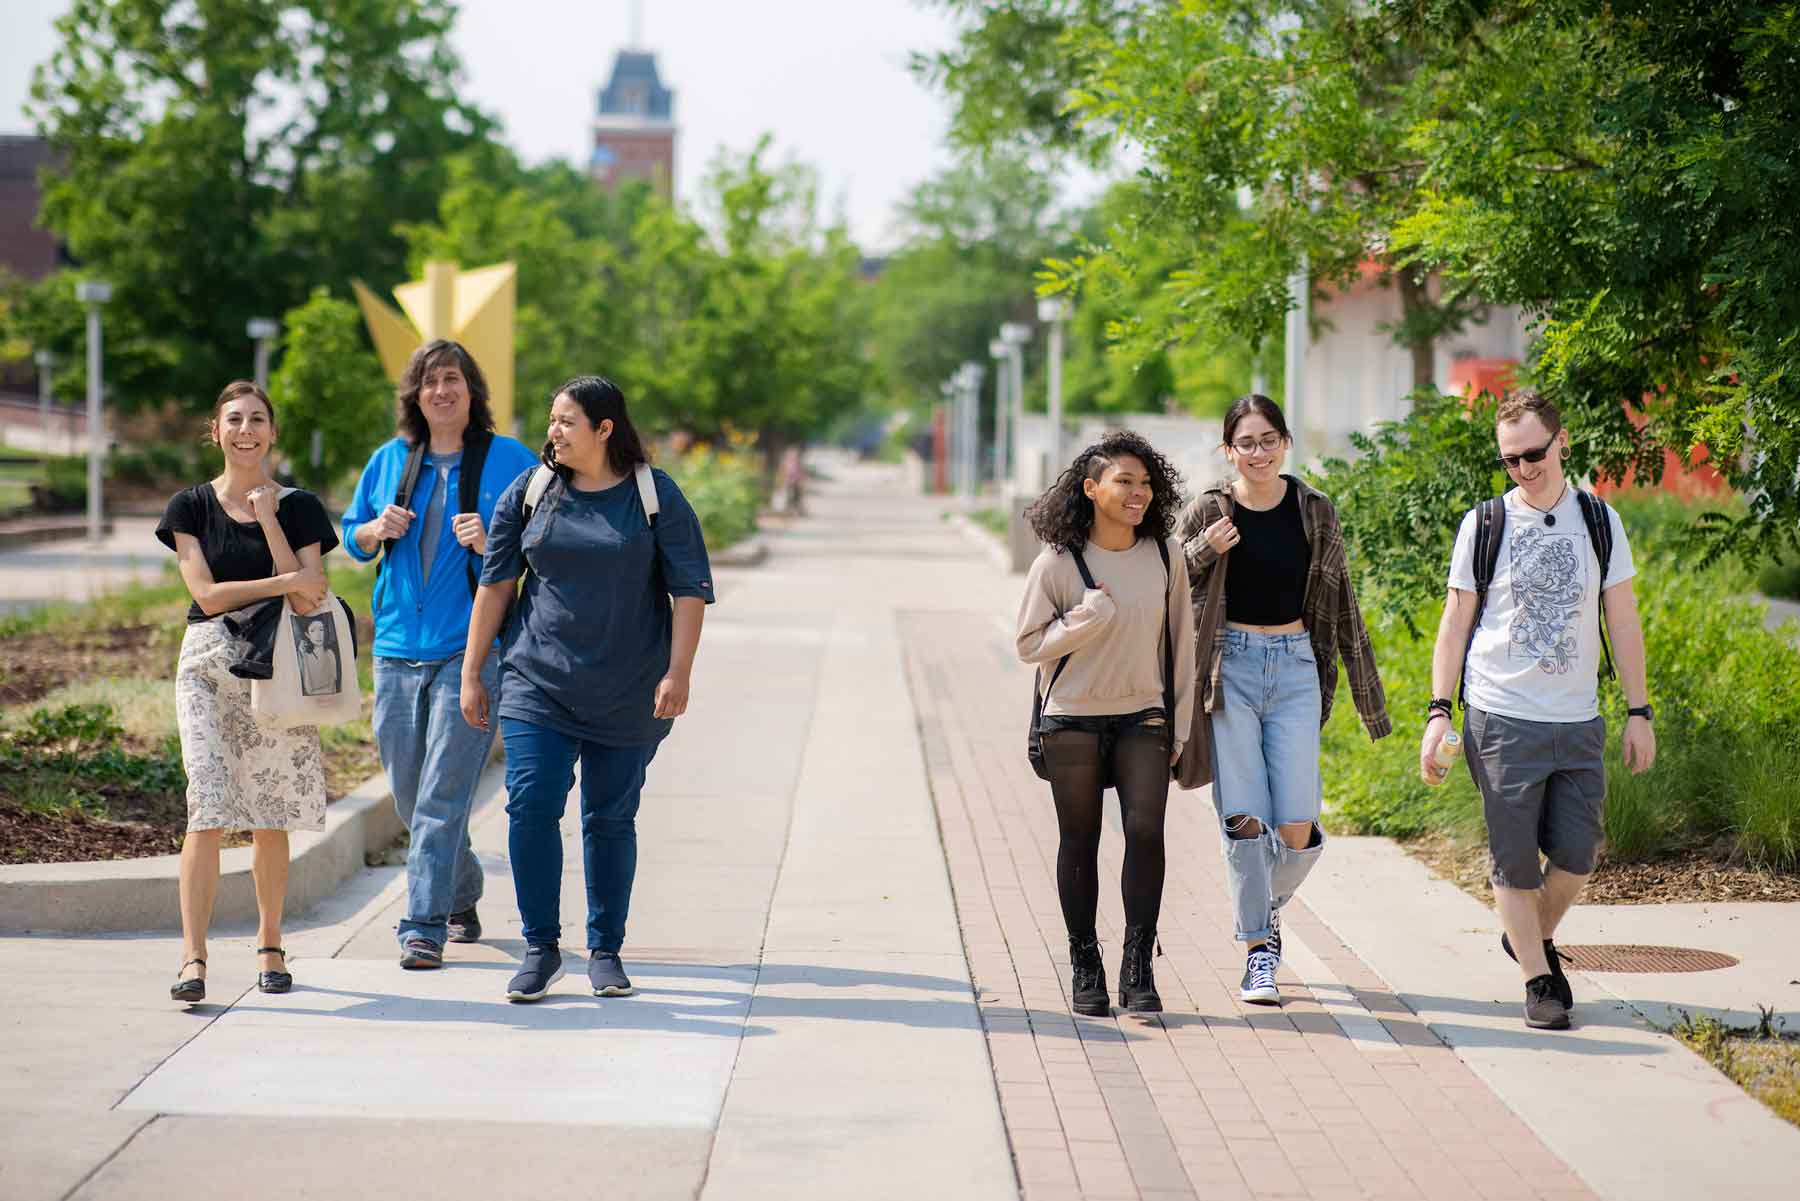 Students at the Metropolitan State University of Denver Campus